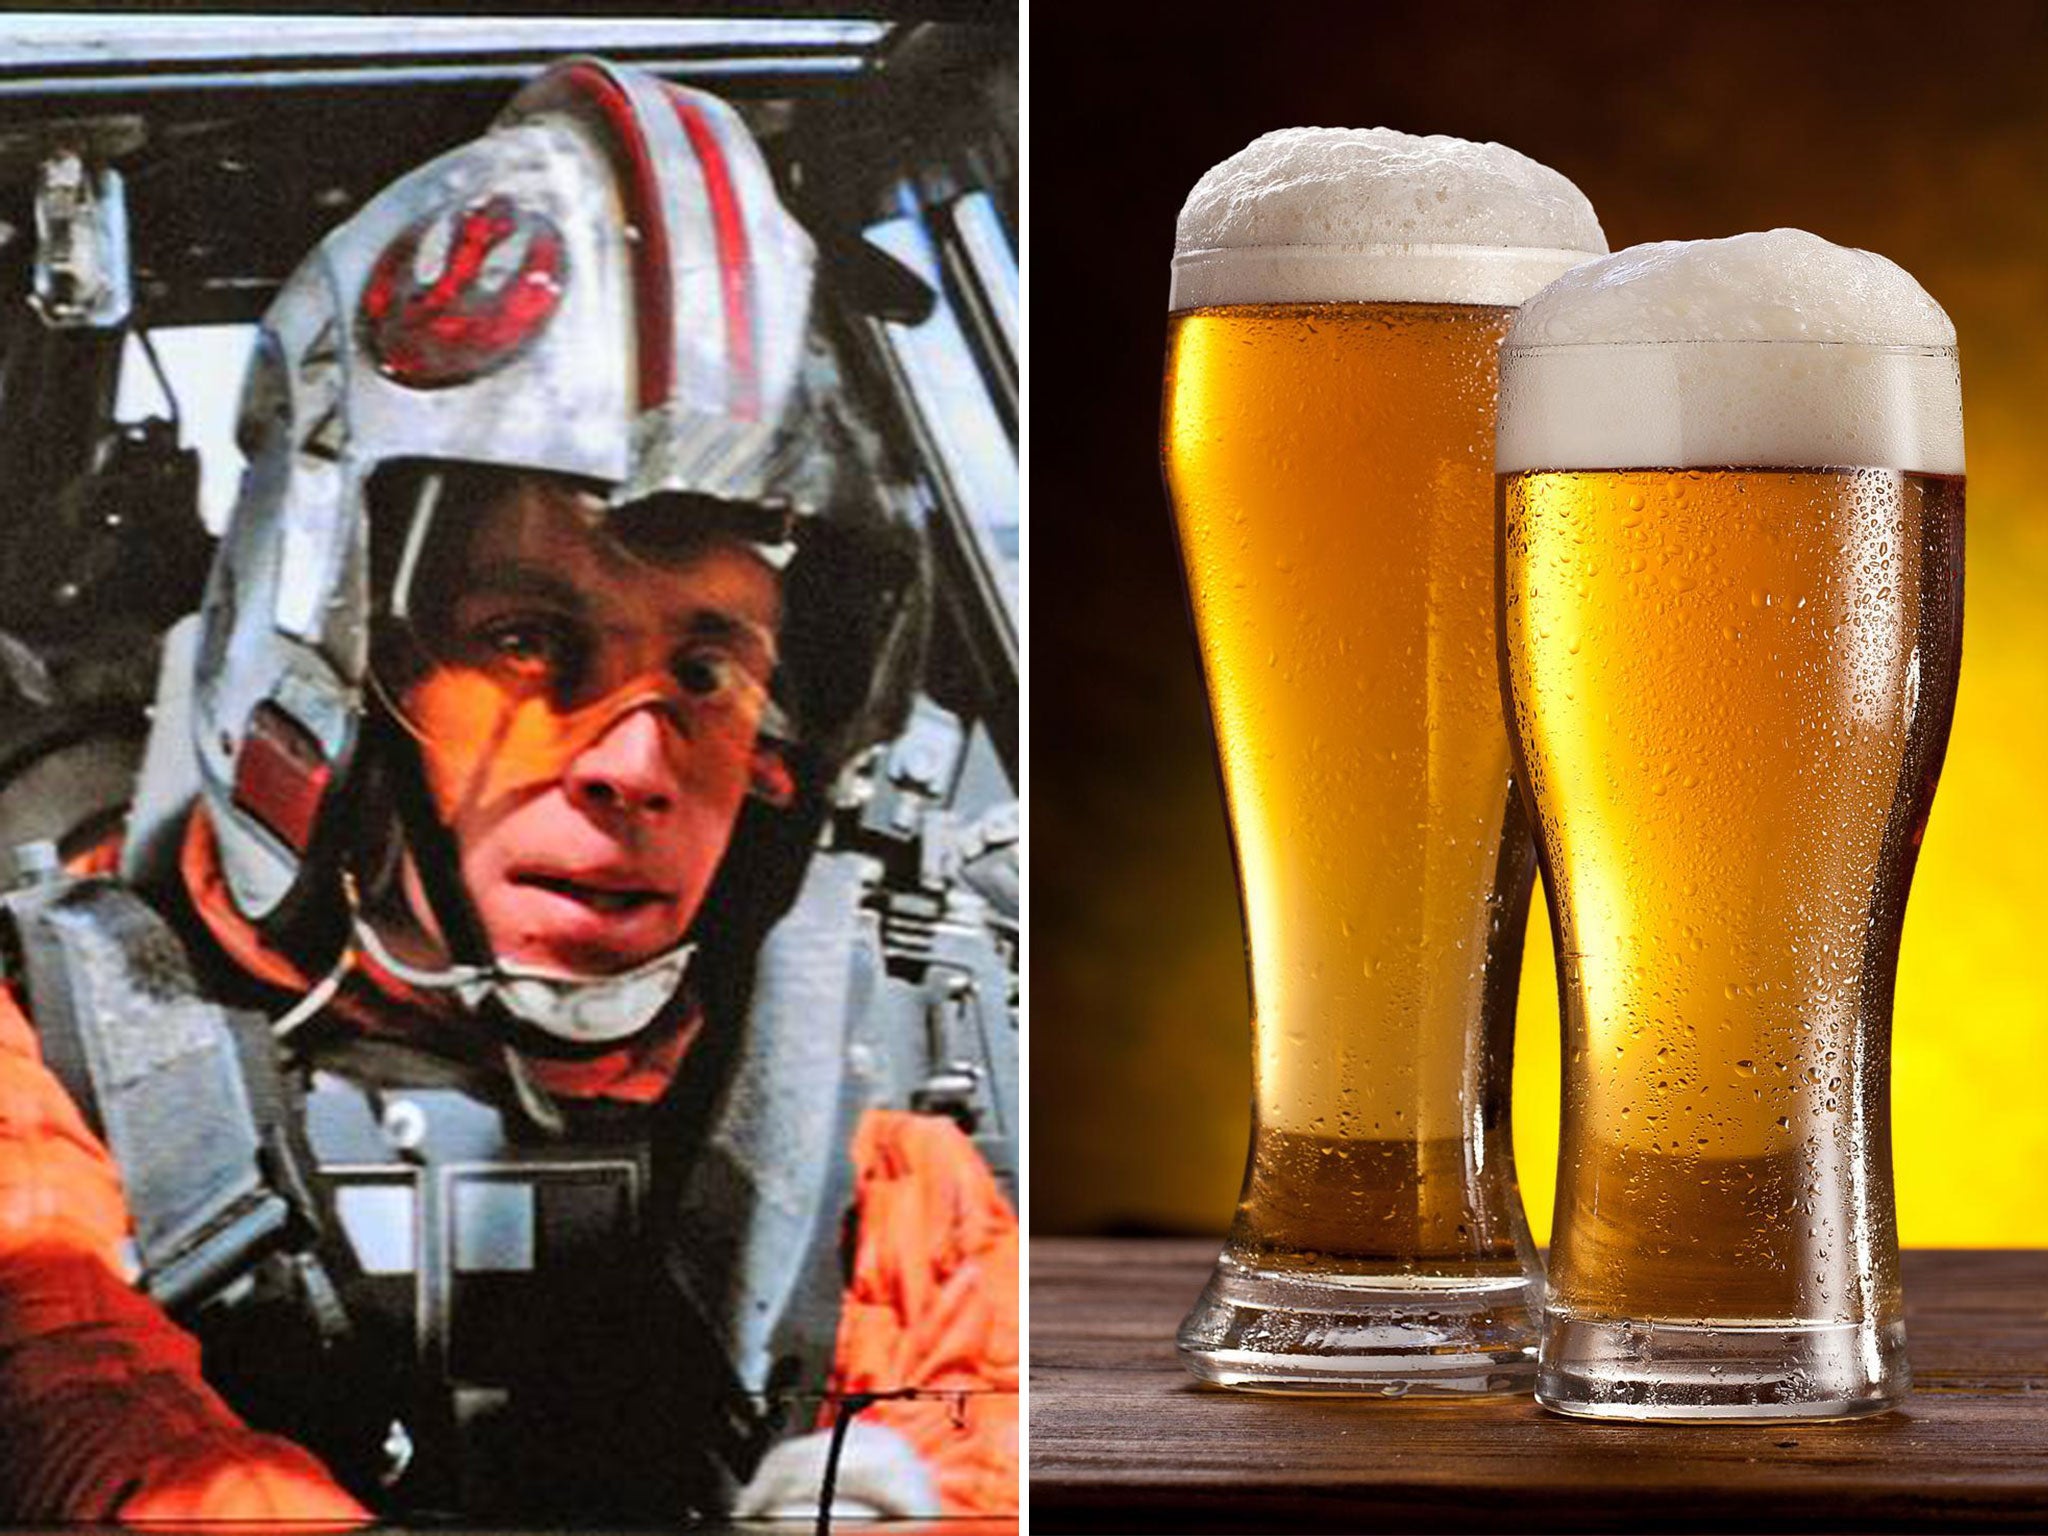 Beer wars: Star Wars owner Lucasfilm has filed a legal complaint against a brewery